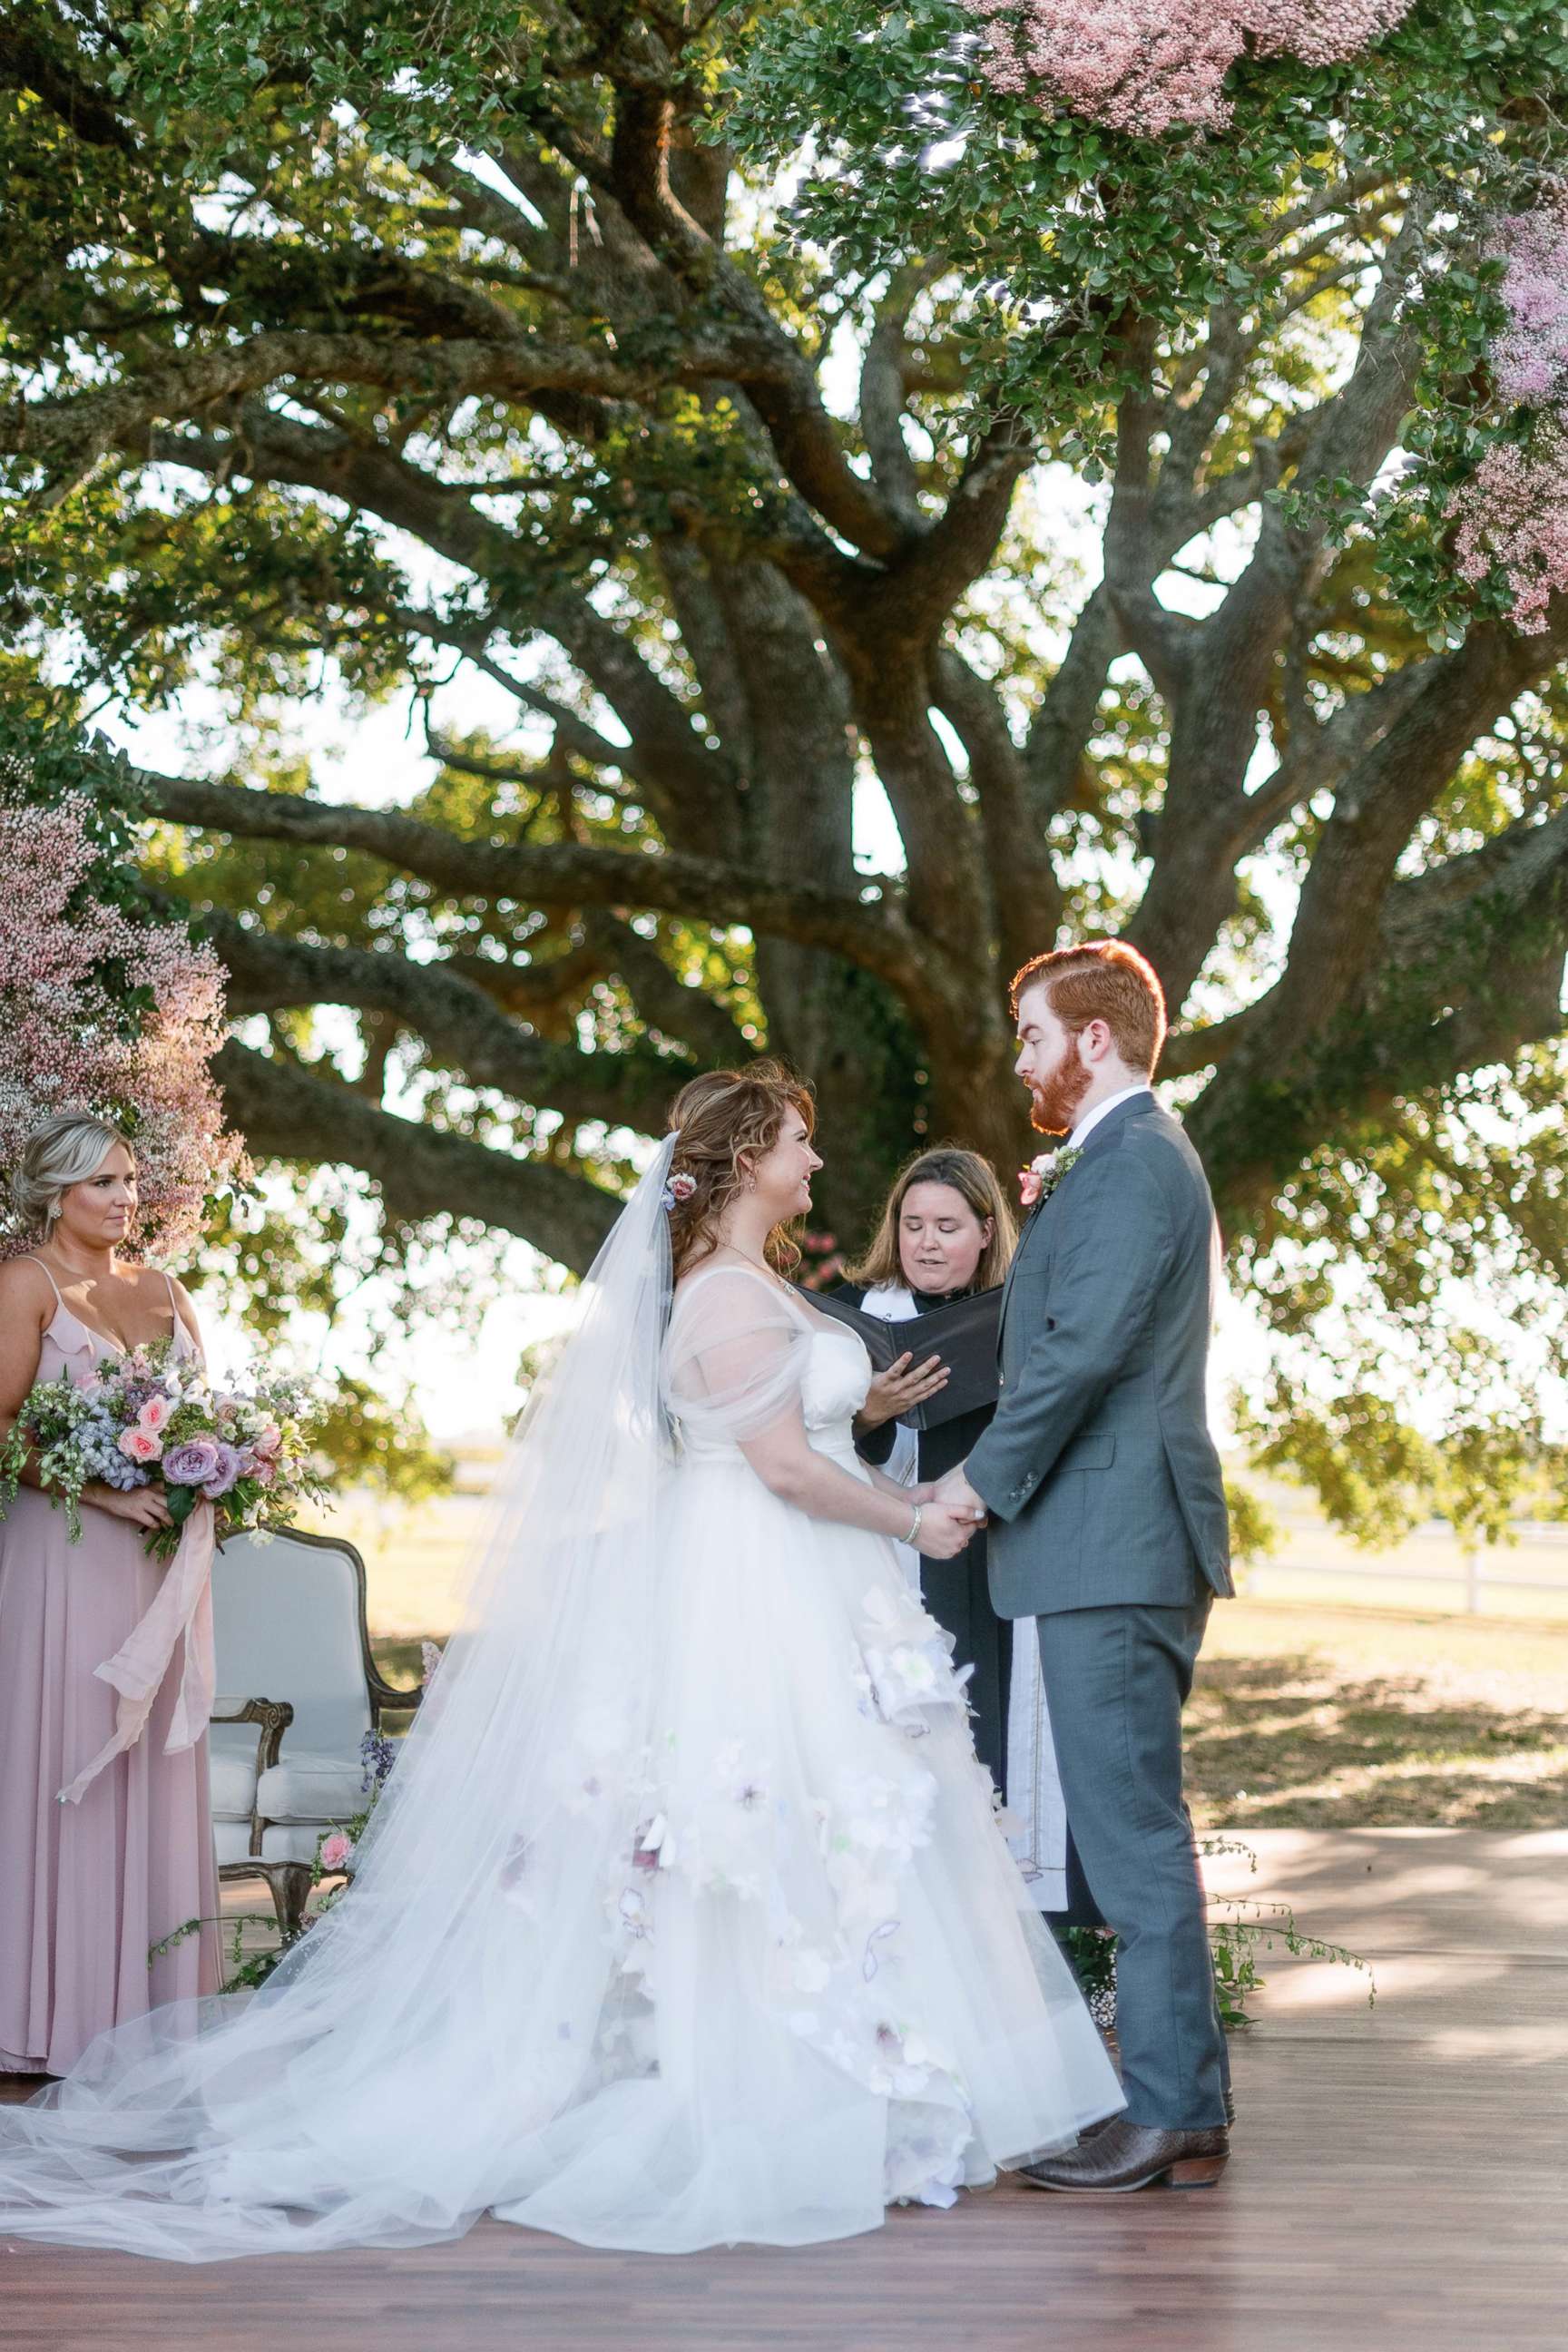 PHOTO: Lauren O'Malley and Jake Woodward wed in Houston, Texas on Oct. 19, 2019.